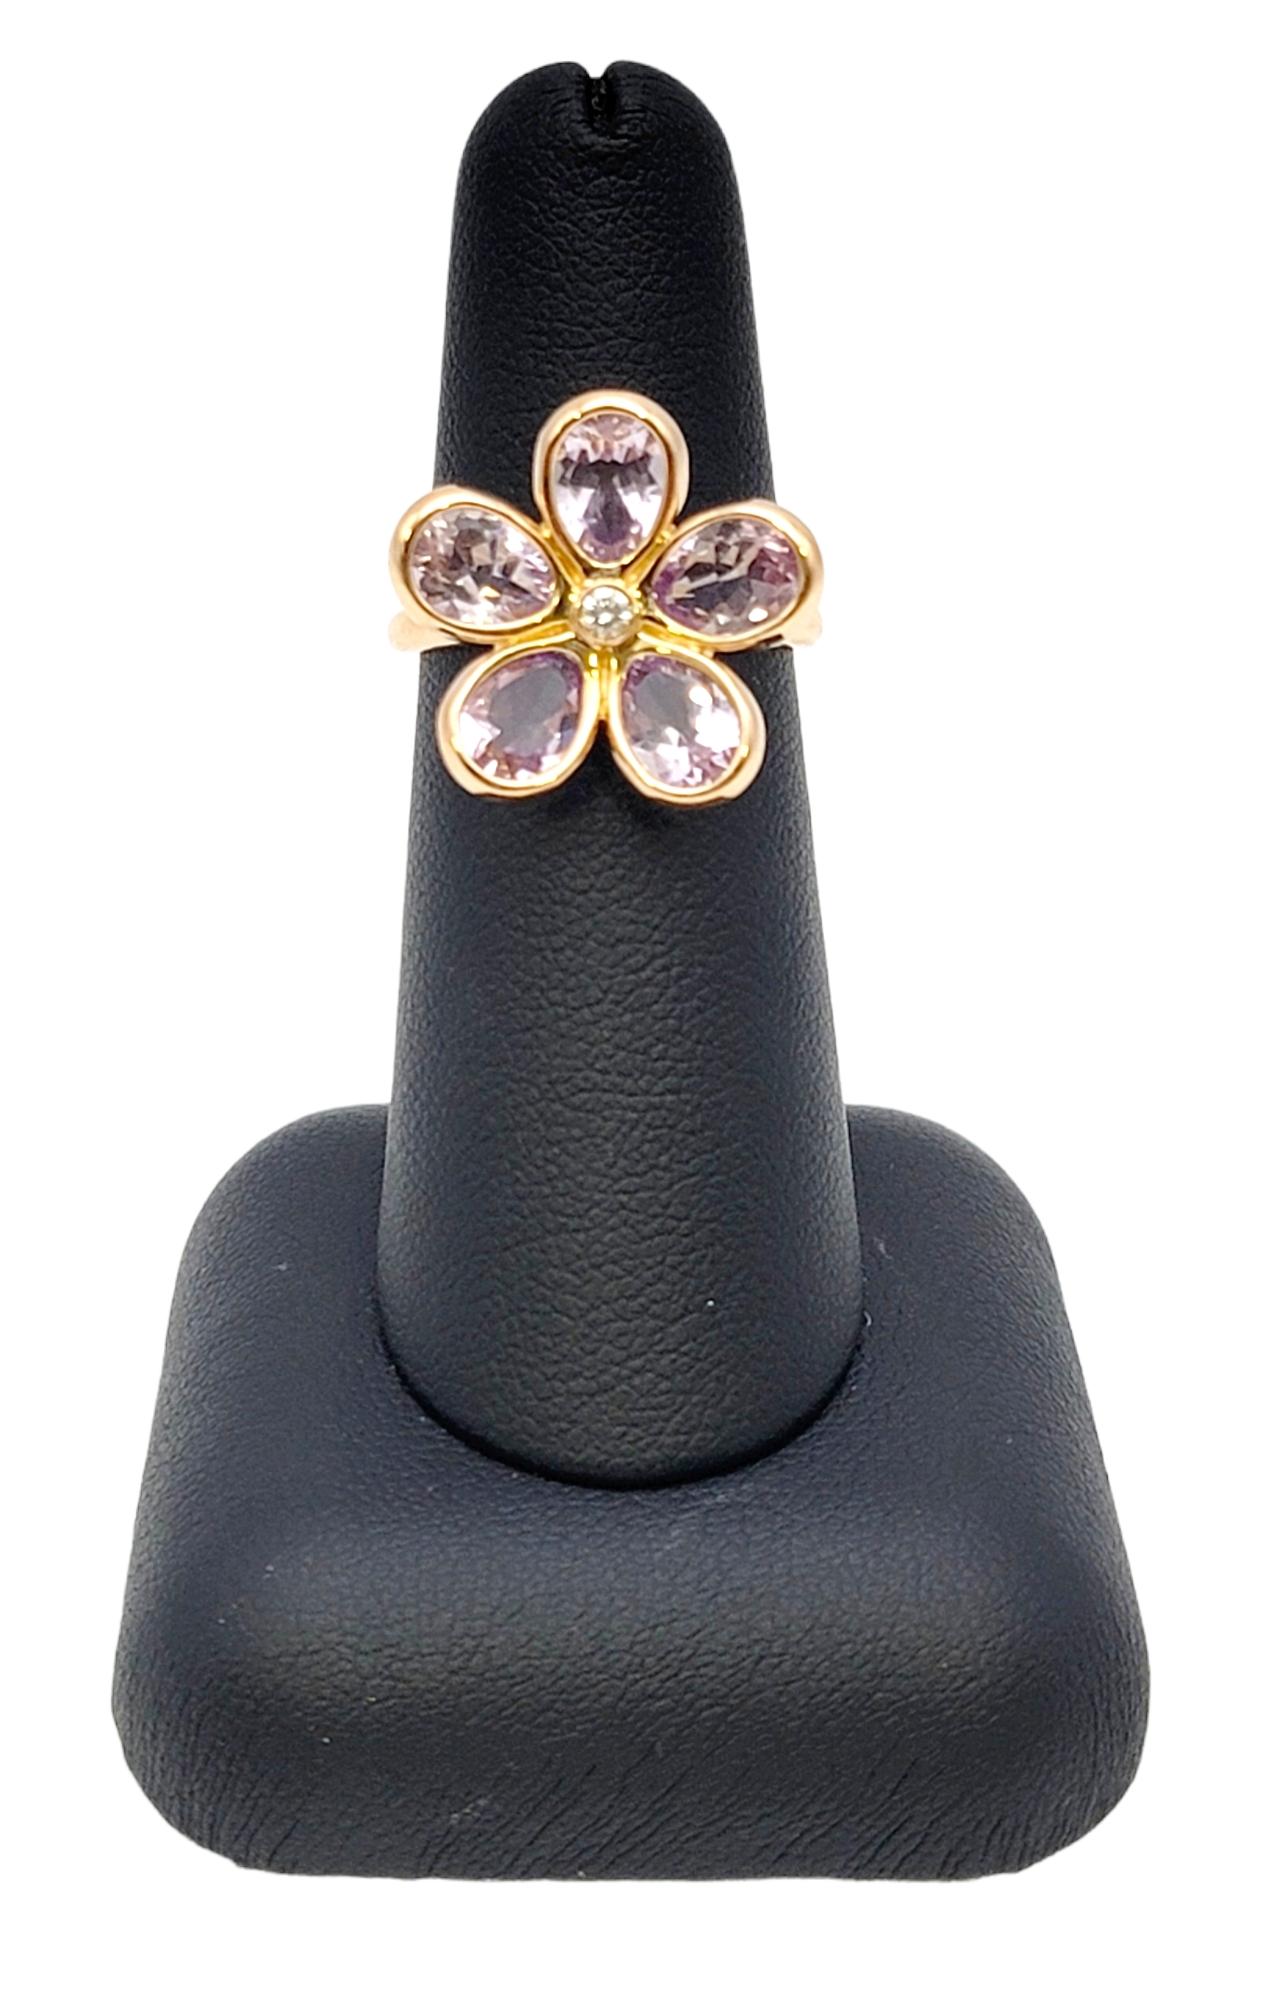 Tiffany & Co. Amethyst and Diamond Sparklers Flower Ring in 18 Karat Rose Gold 4